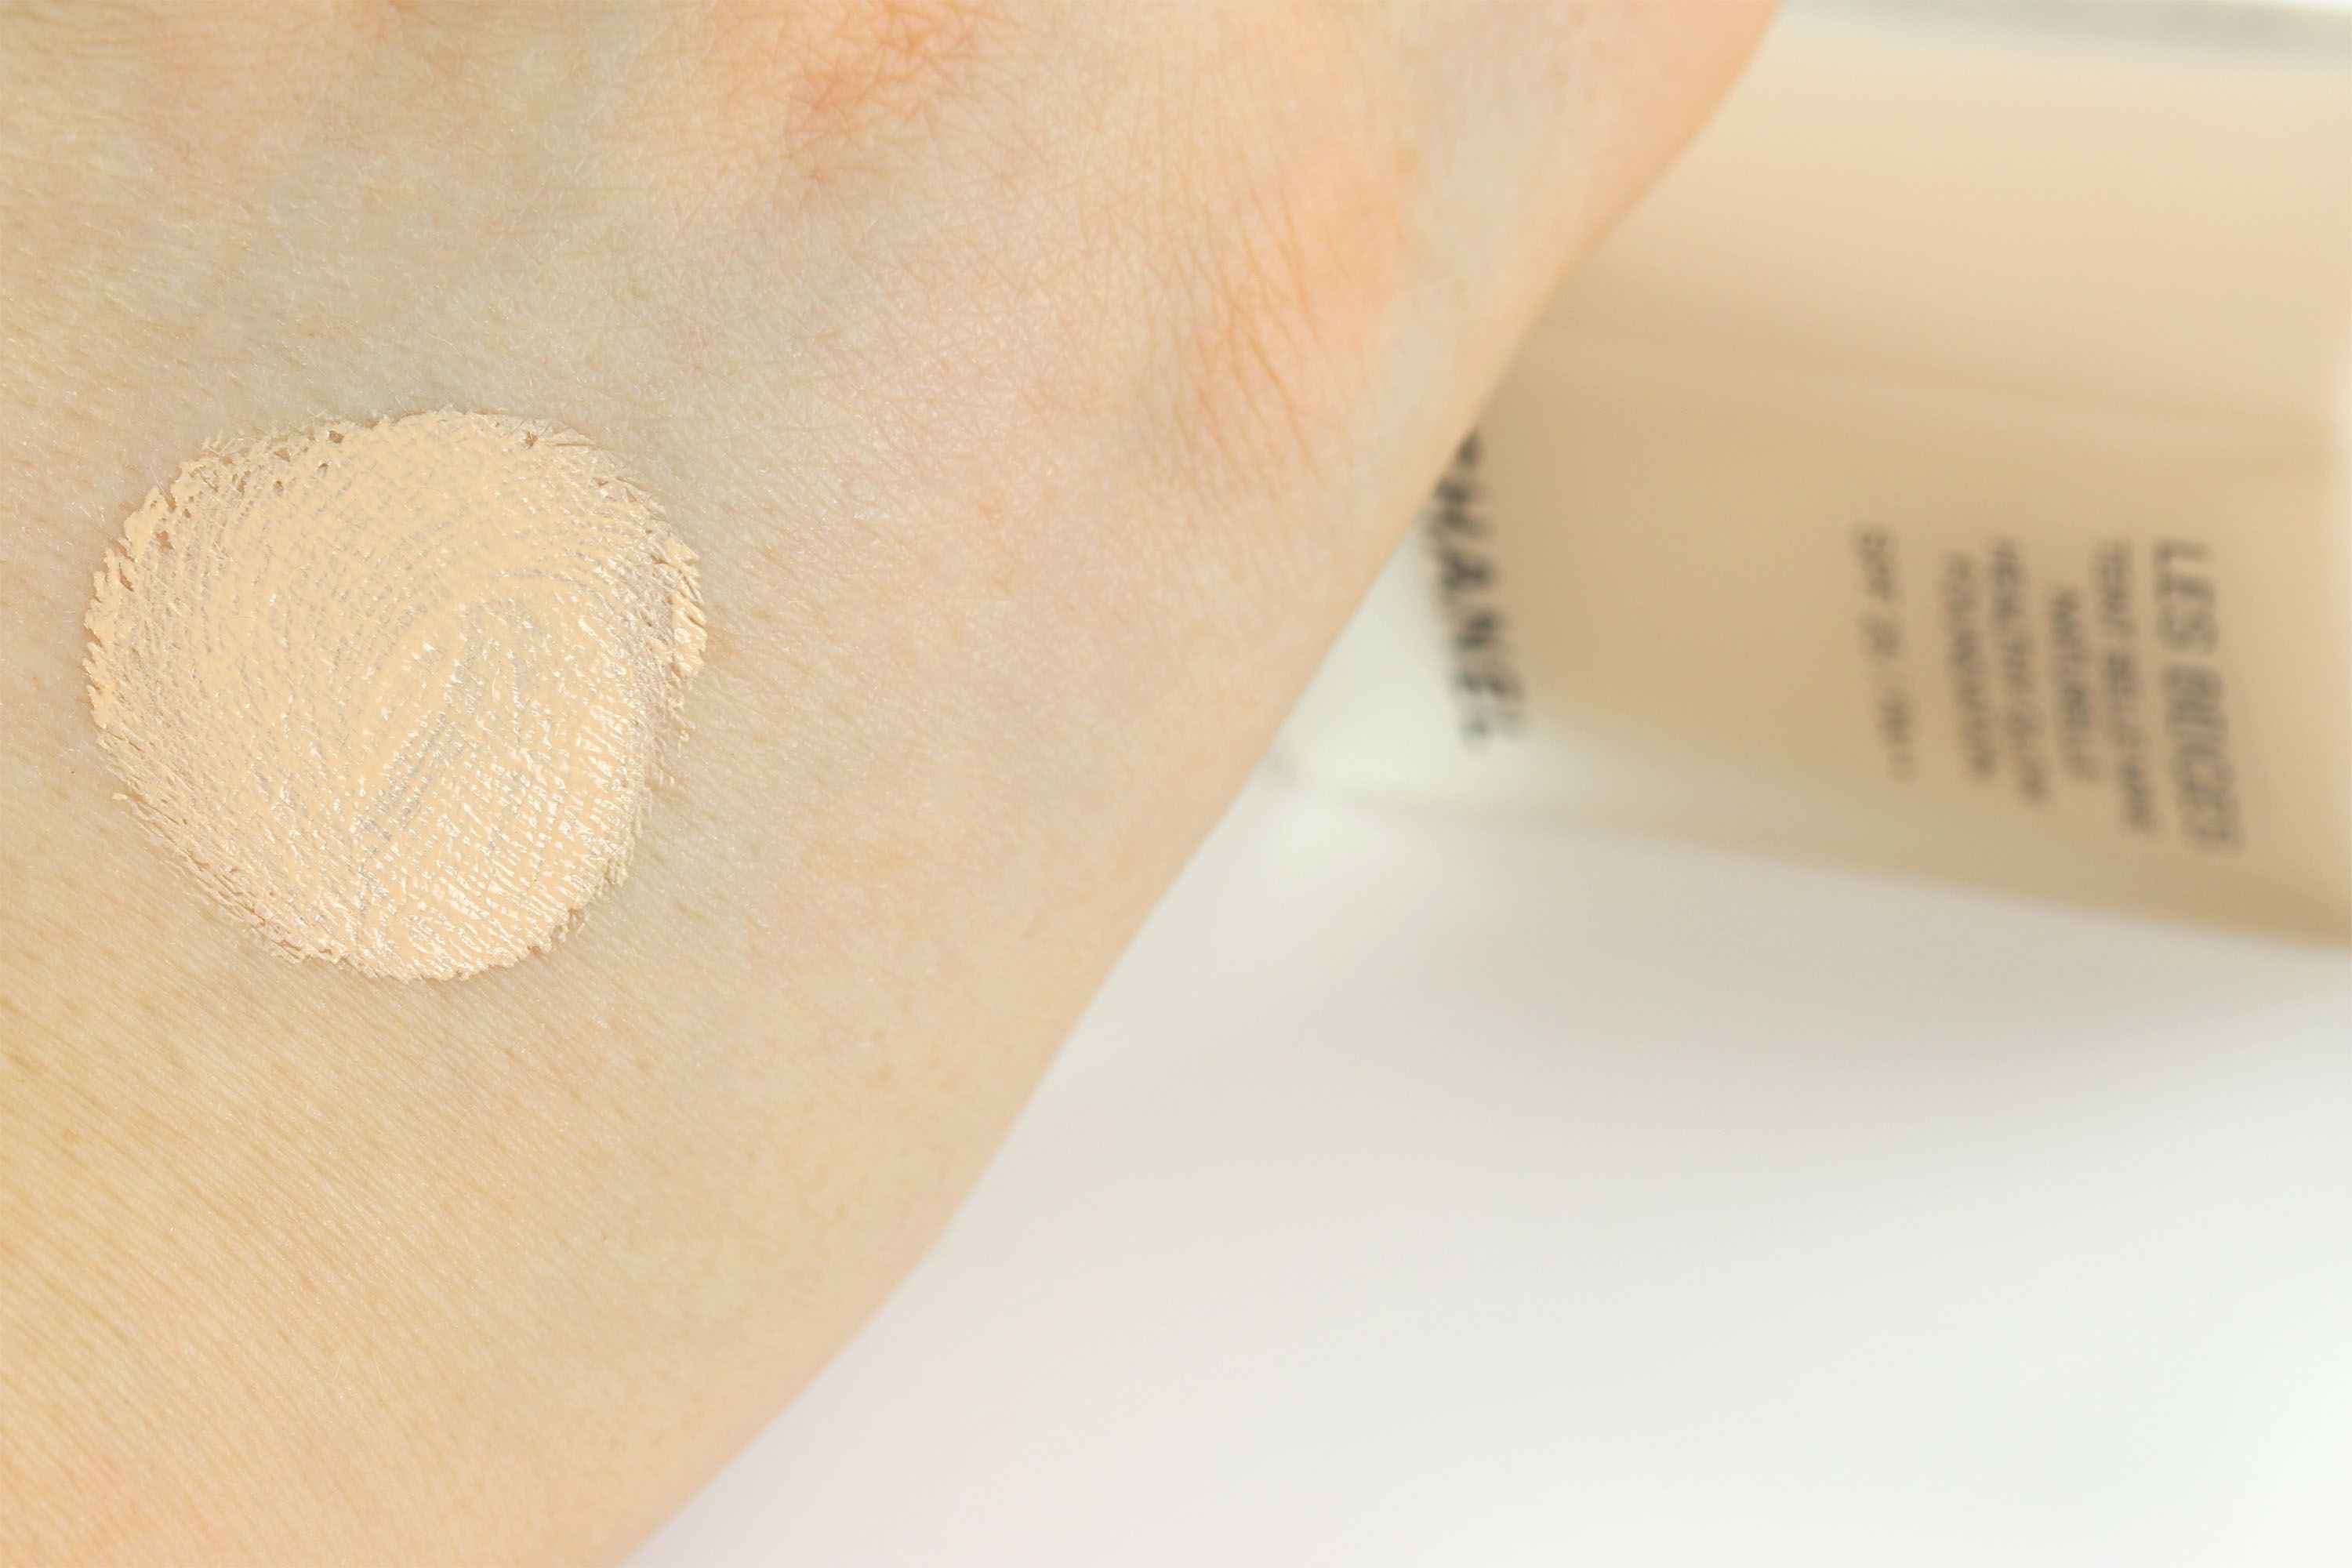 Chanel Les Beiges Healthy Glow Foundation Swatch